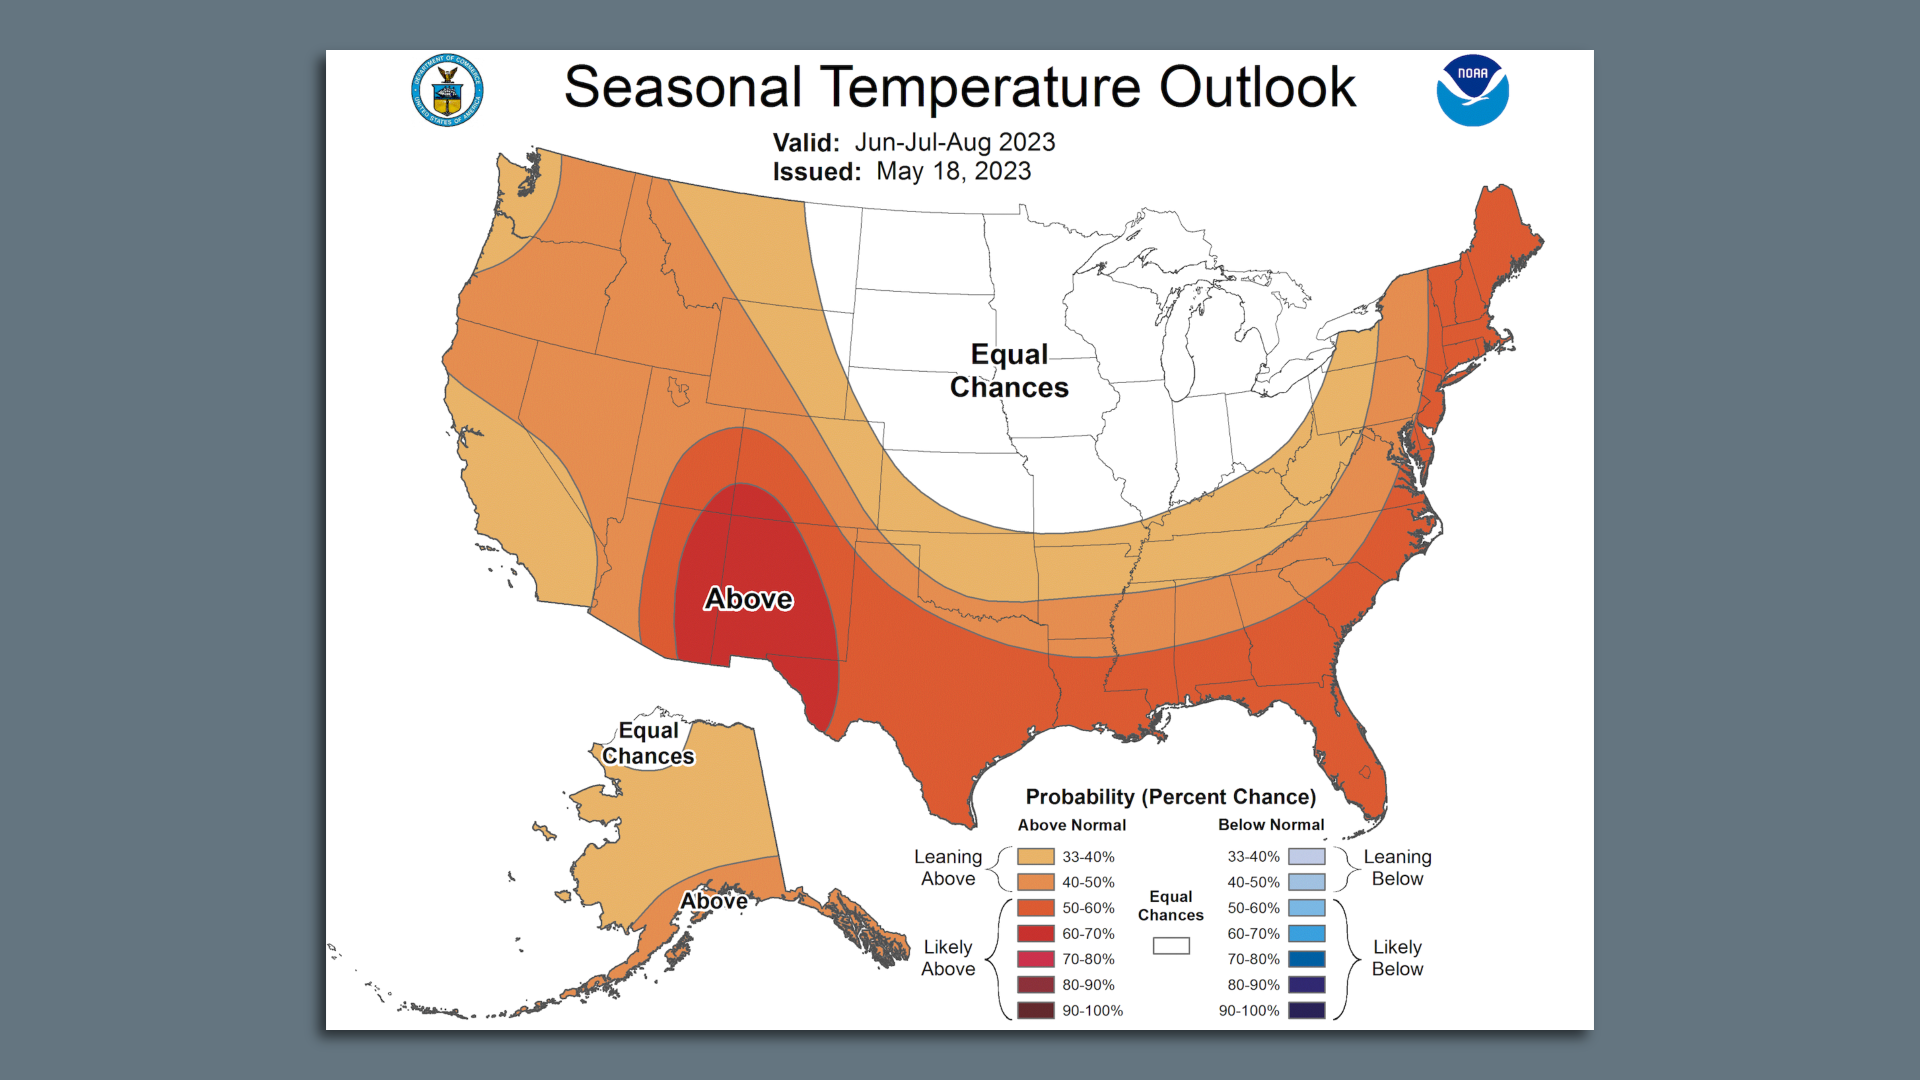 Climate outlook for summer 2023 from NOAA showing warmer than average conditions across Alaska and much of the Lower 48 states.